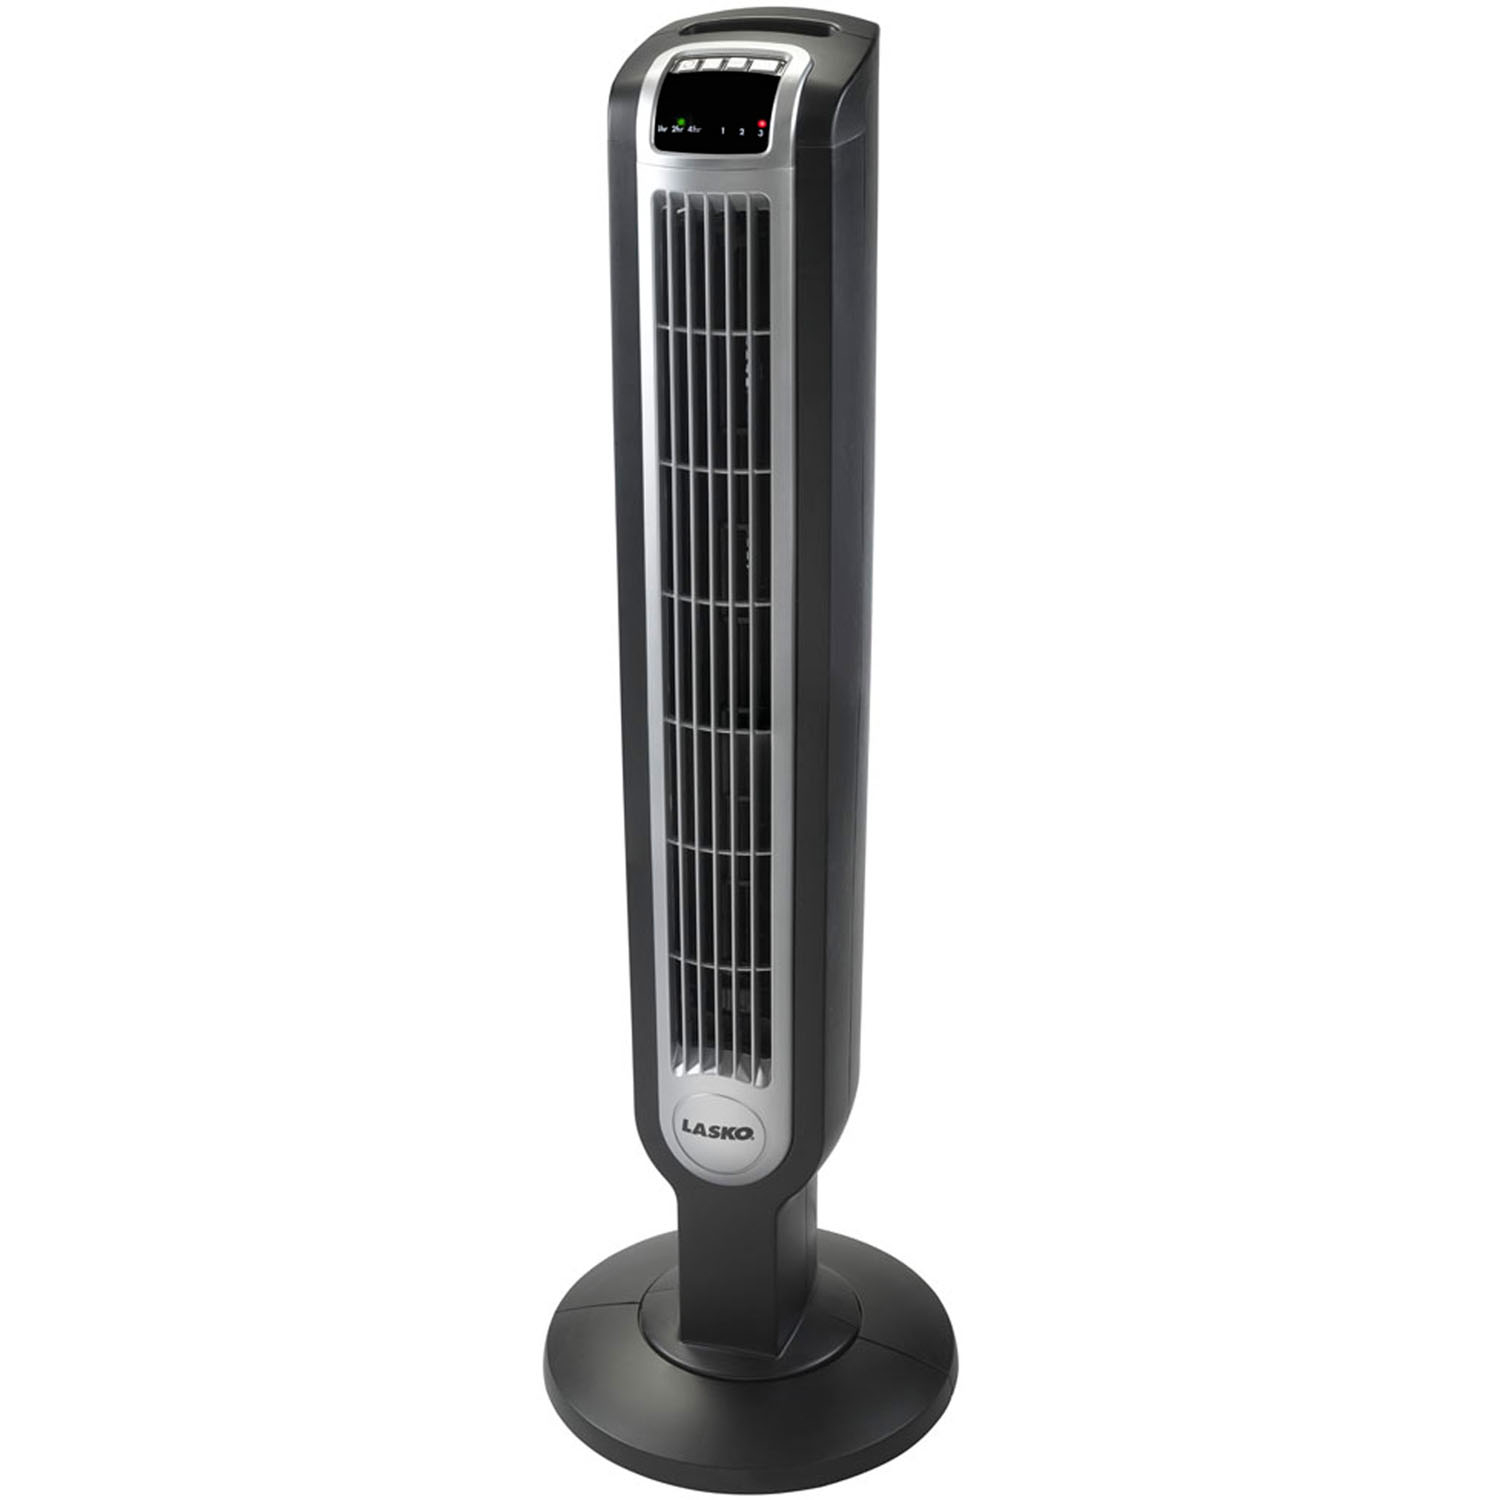 Lasko 36 Tower Fan With Remote Control In Black pertaining to dimensions 1500 X 1500